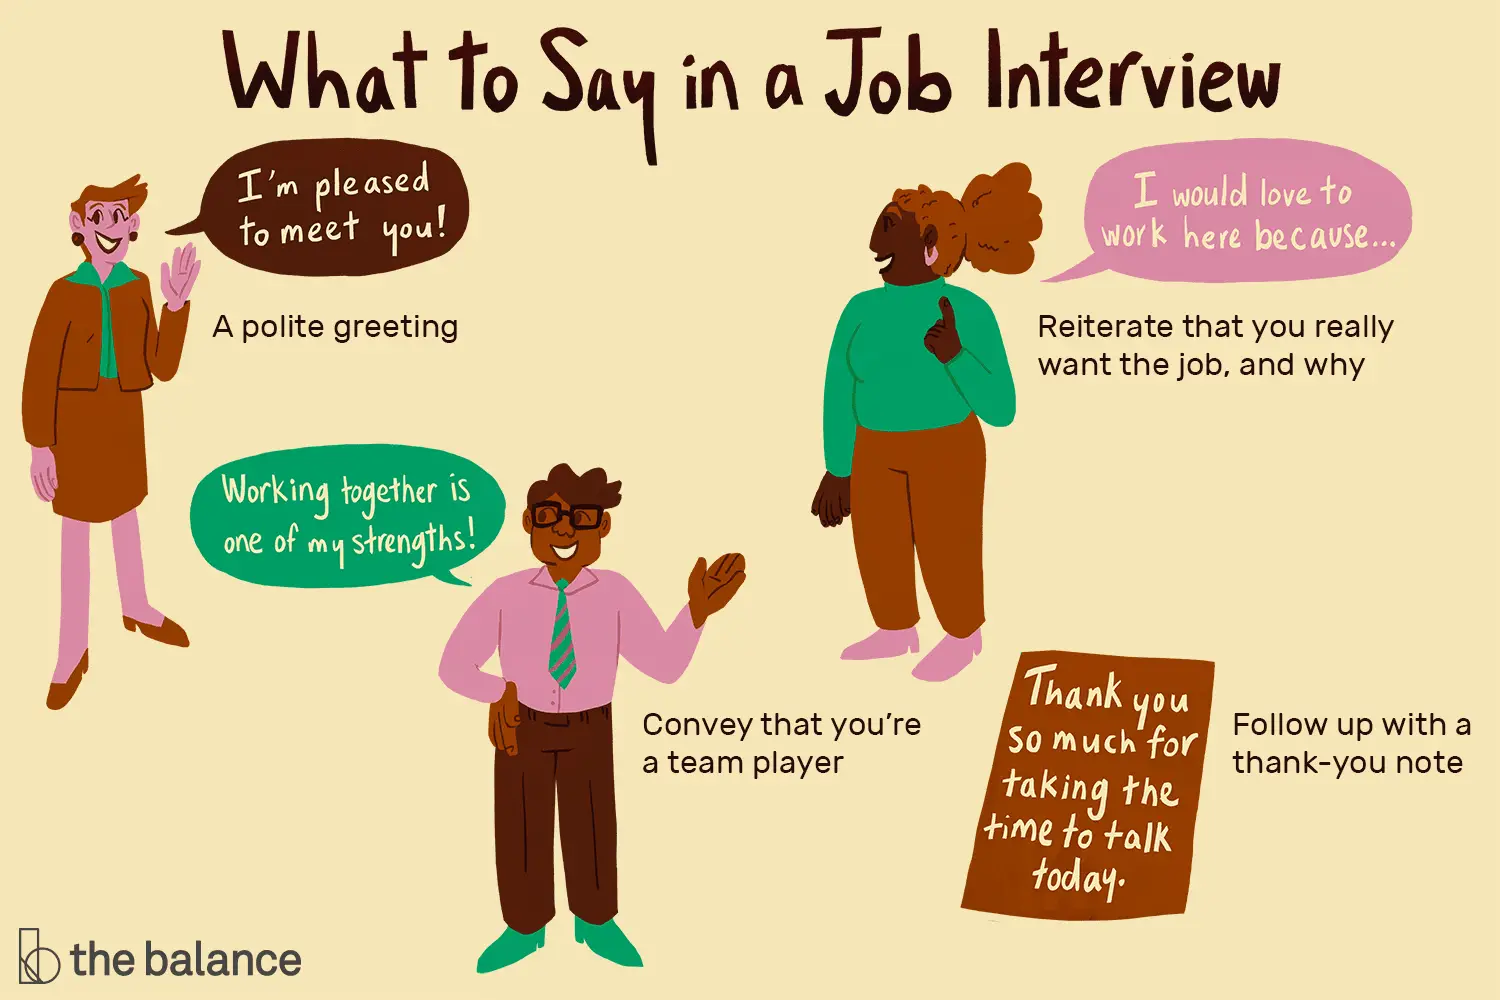 What to Say in a Job Interview